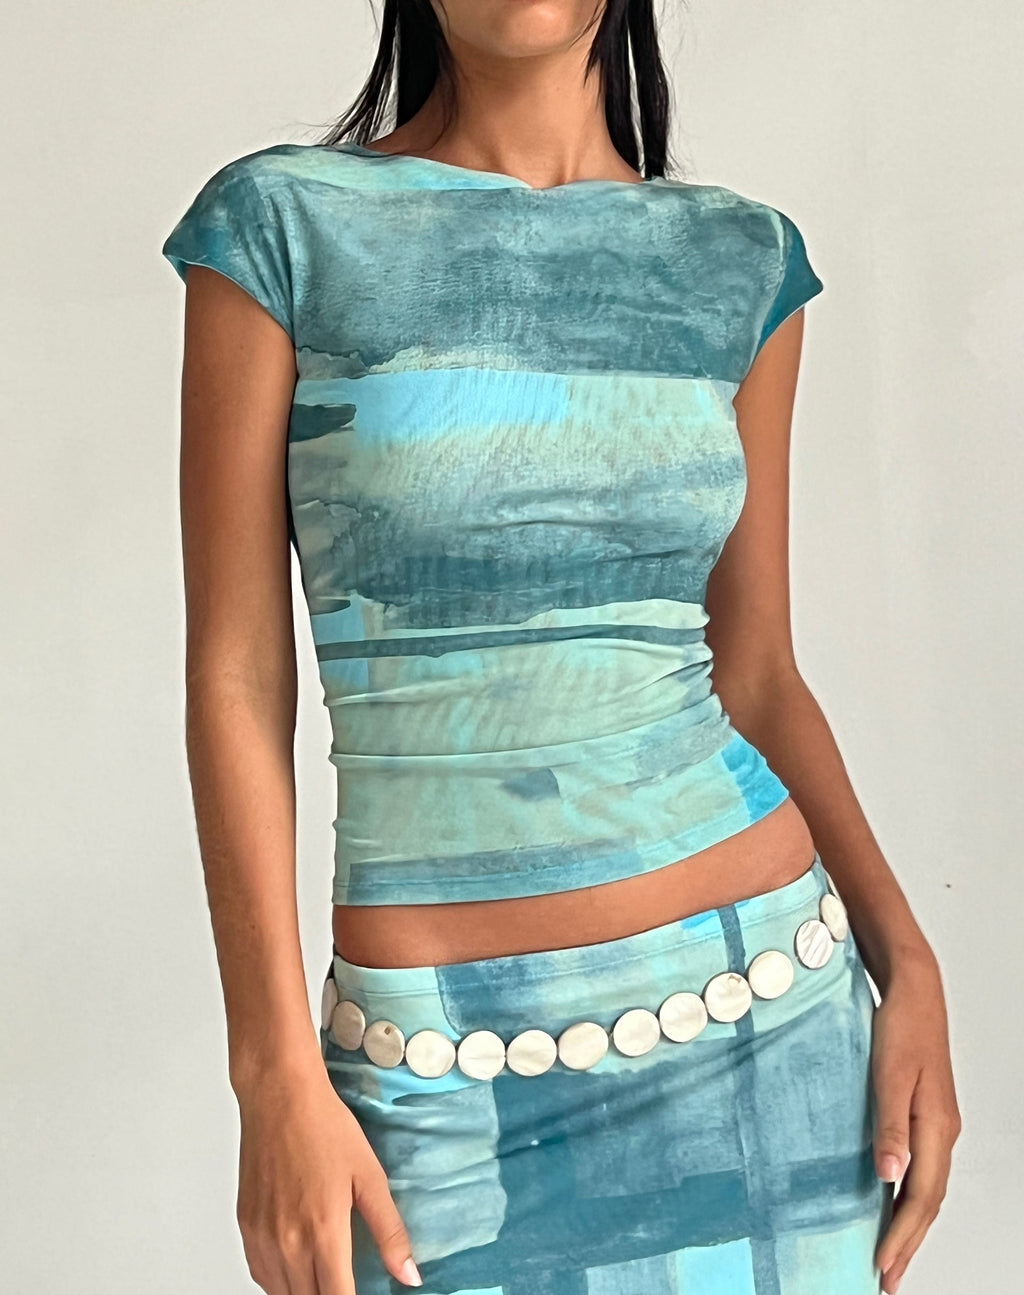 MOTEL X JACQUIE Nova Top in Mesh Green and Blue Abstract Paint Brush